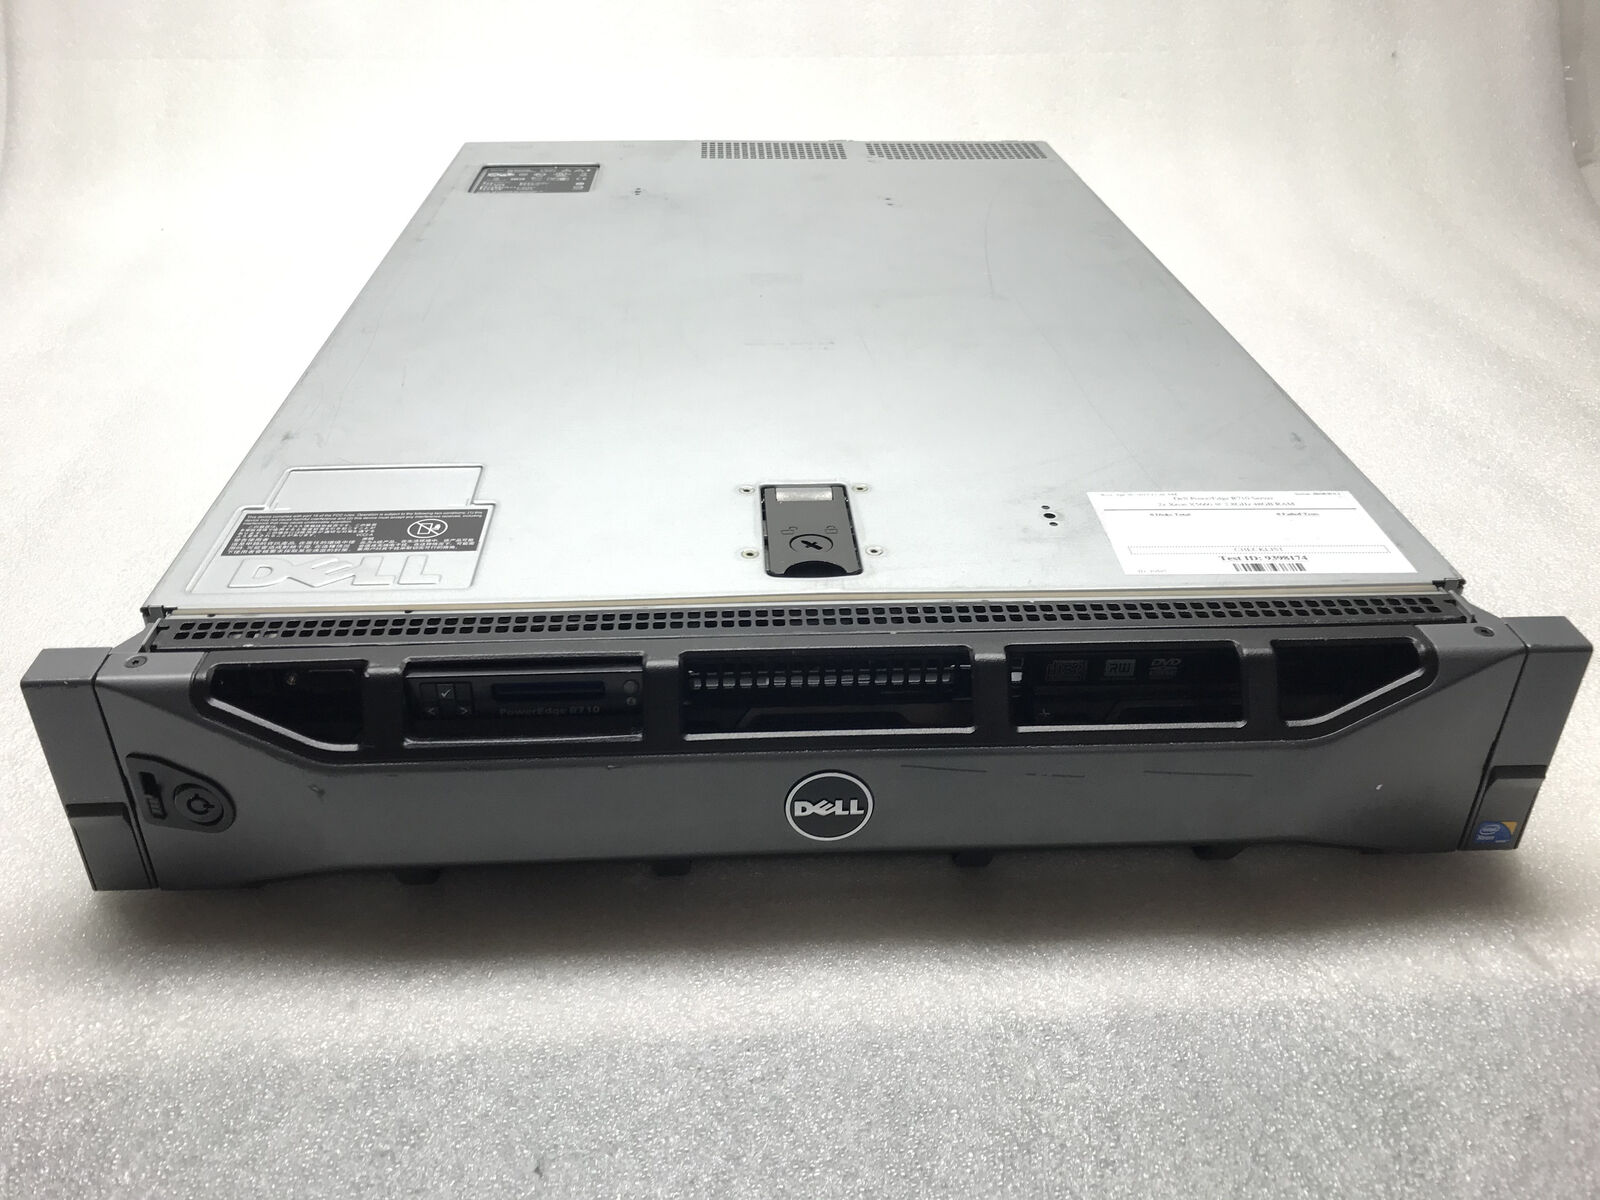 Dell PowerEdge R710 Server BOOTS 2x Xeon X5660 12-cores @2.8GHz 48GB RAM NO HDD